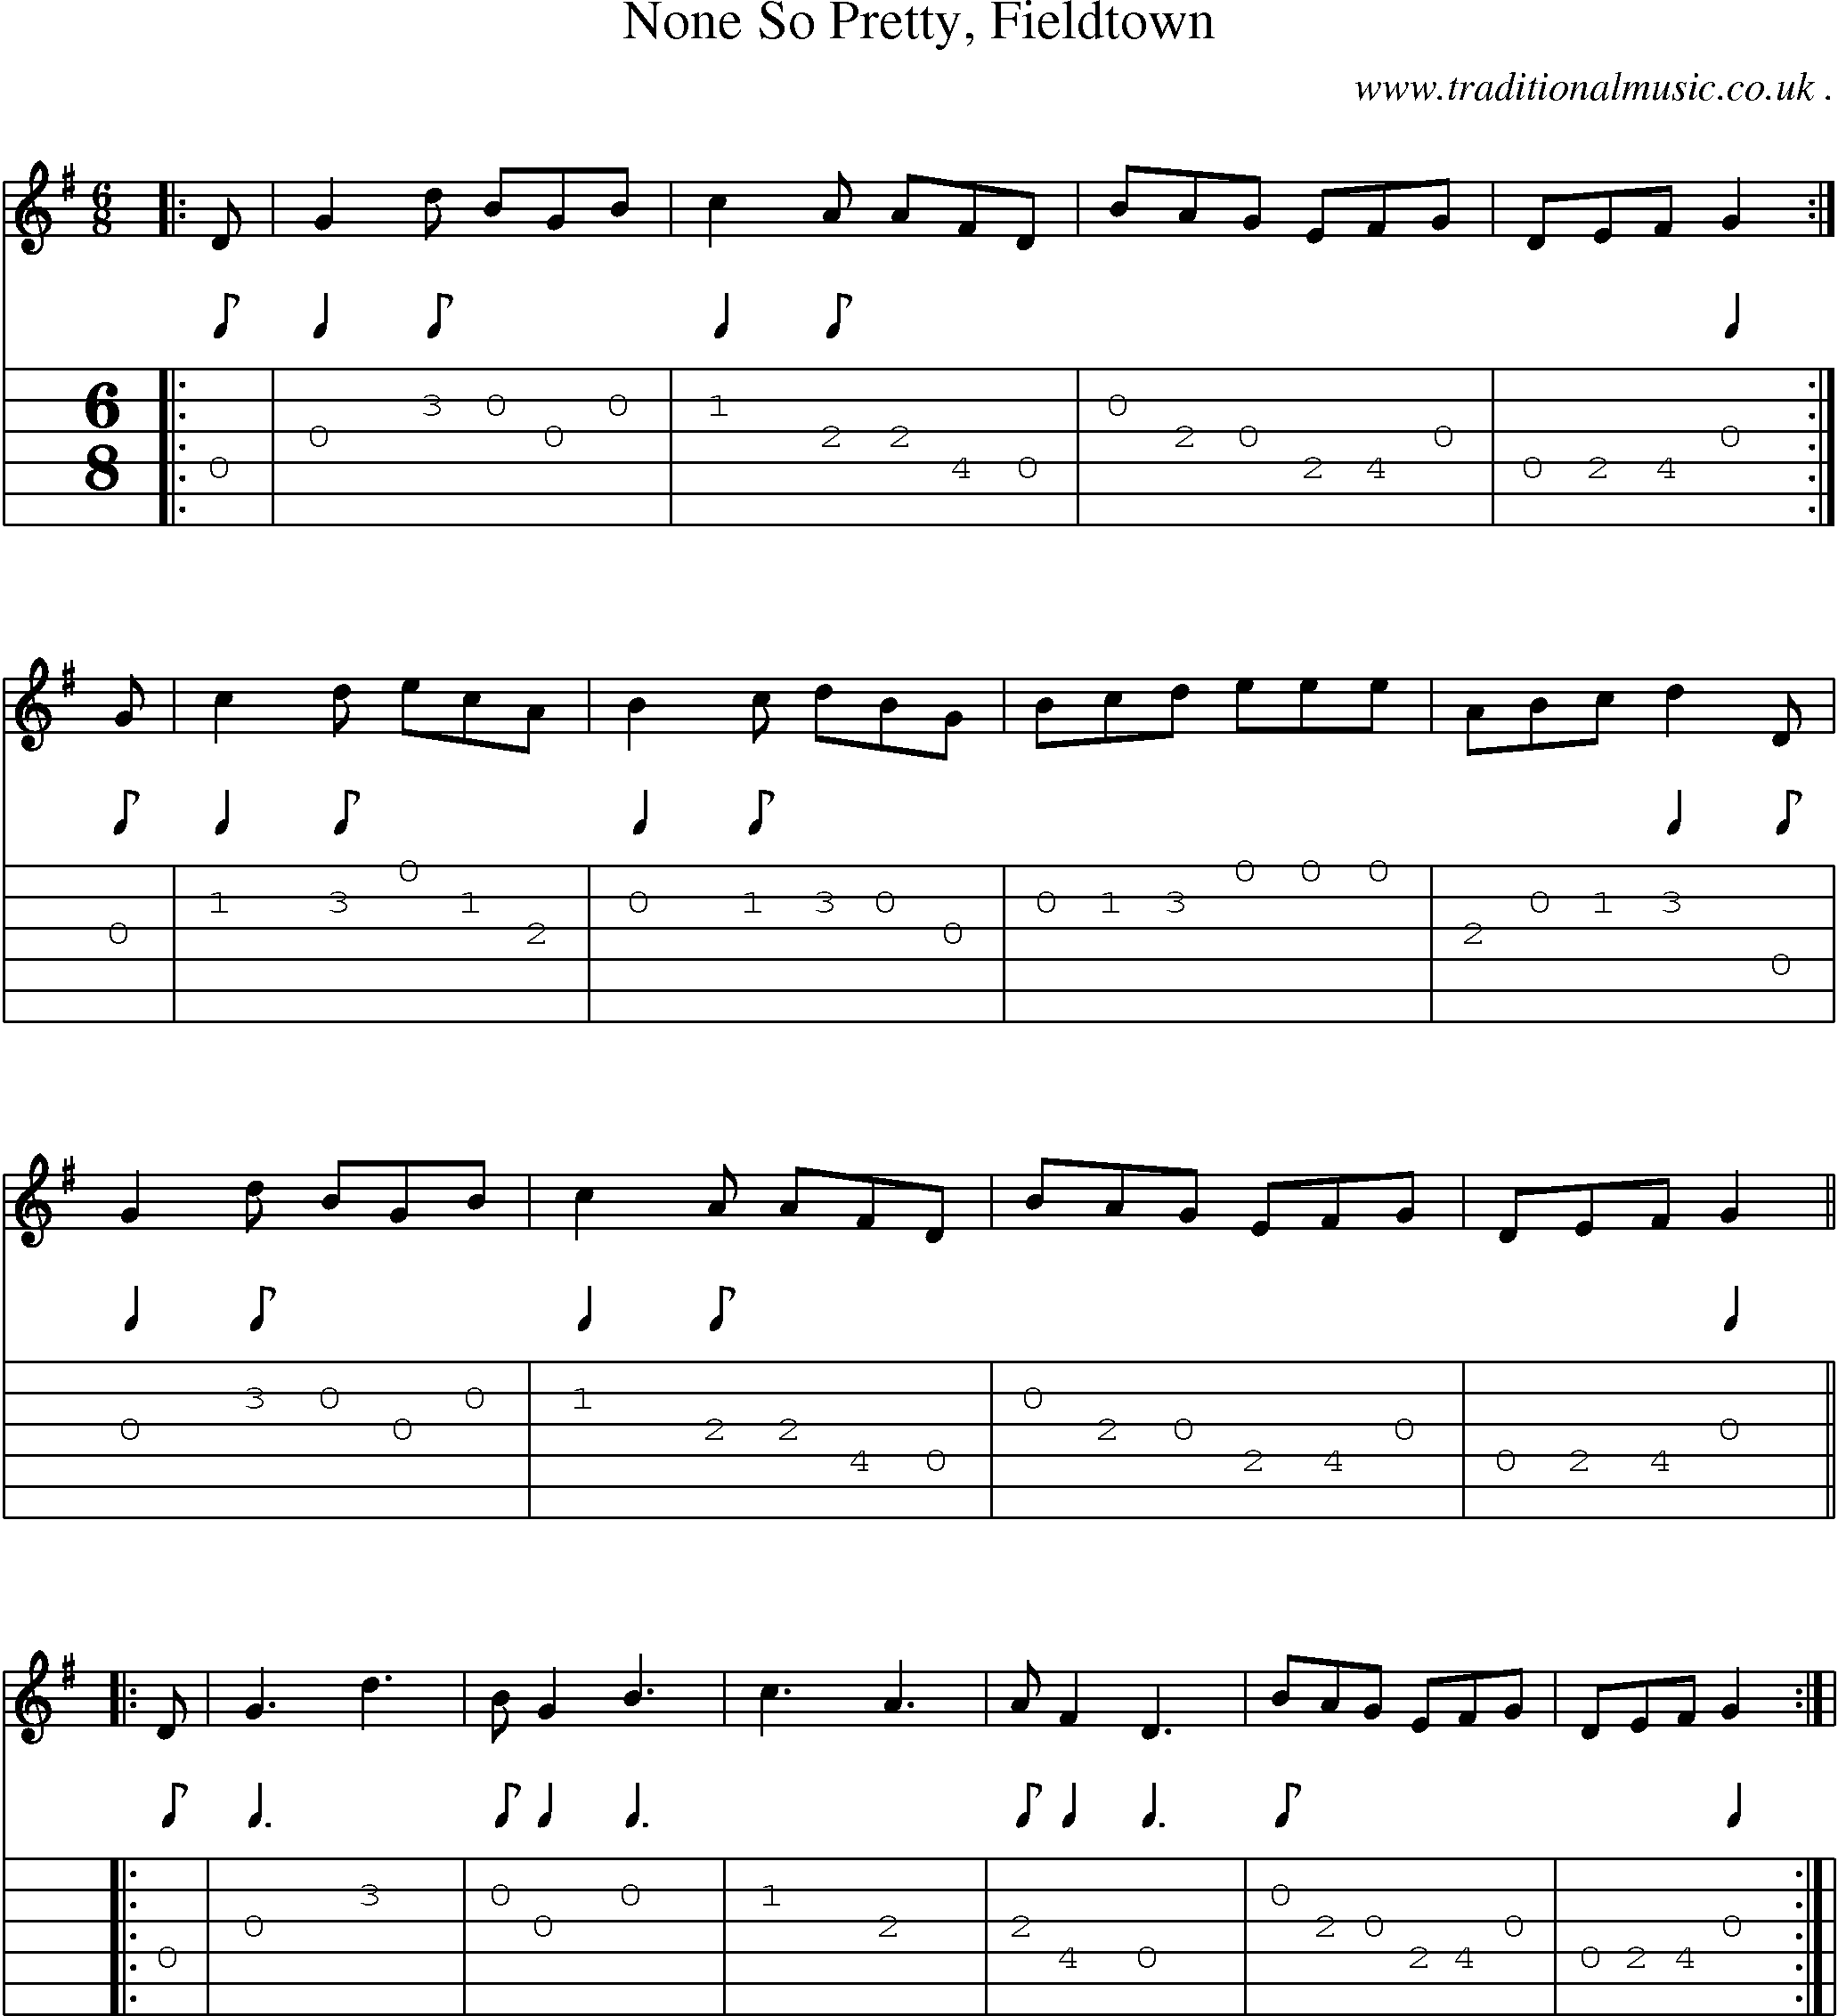 Sheet-Music and Guitar Tabs for None So Pretty Fieldtown